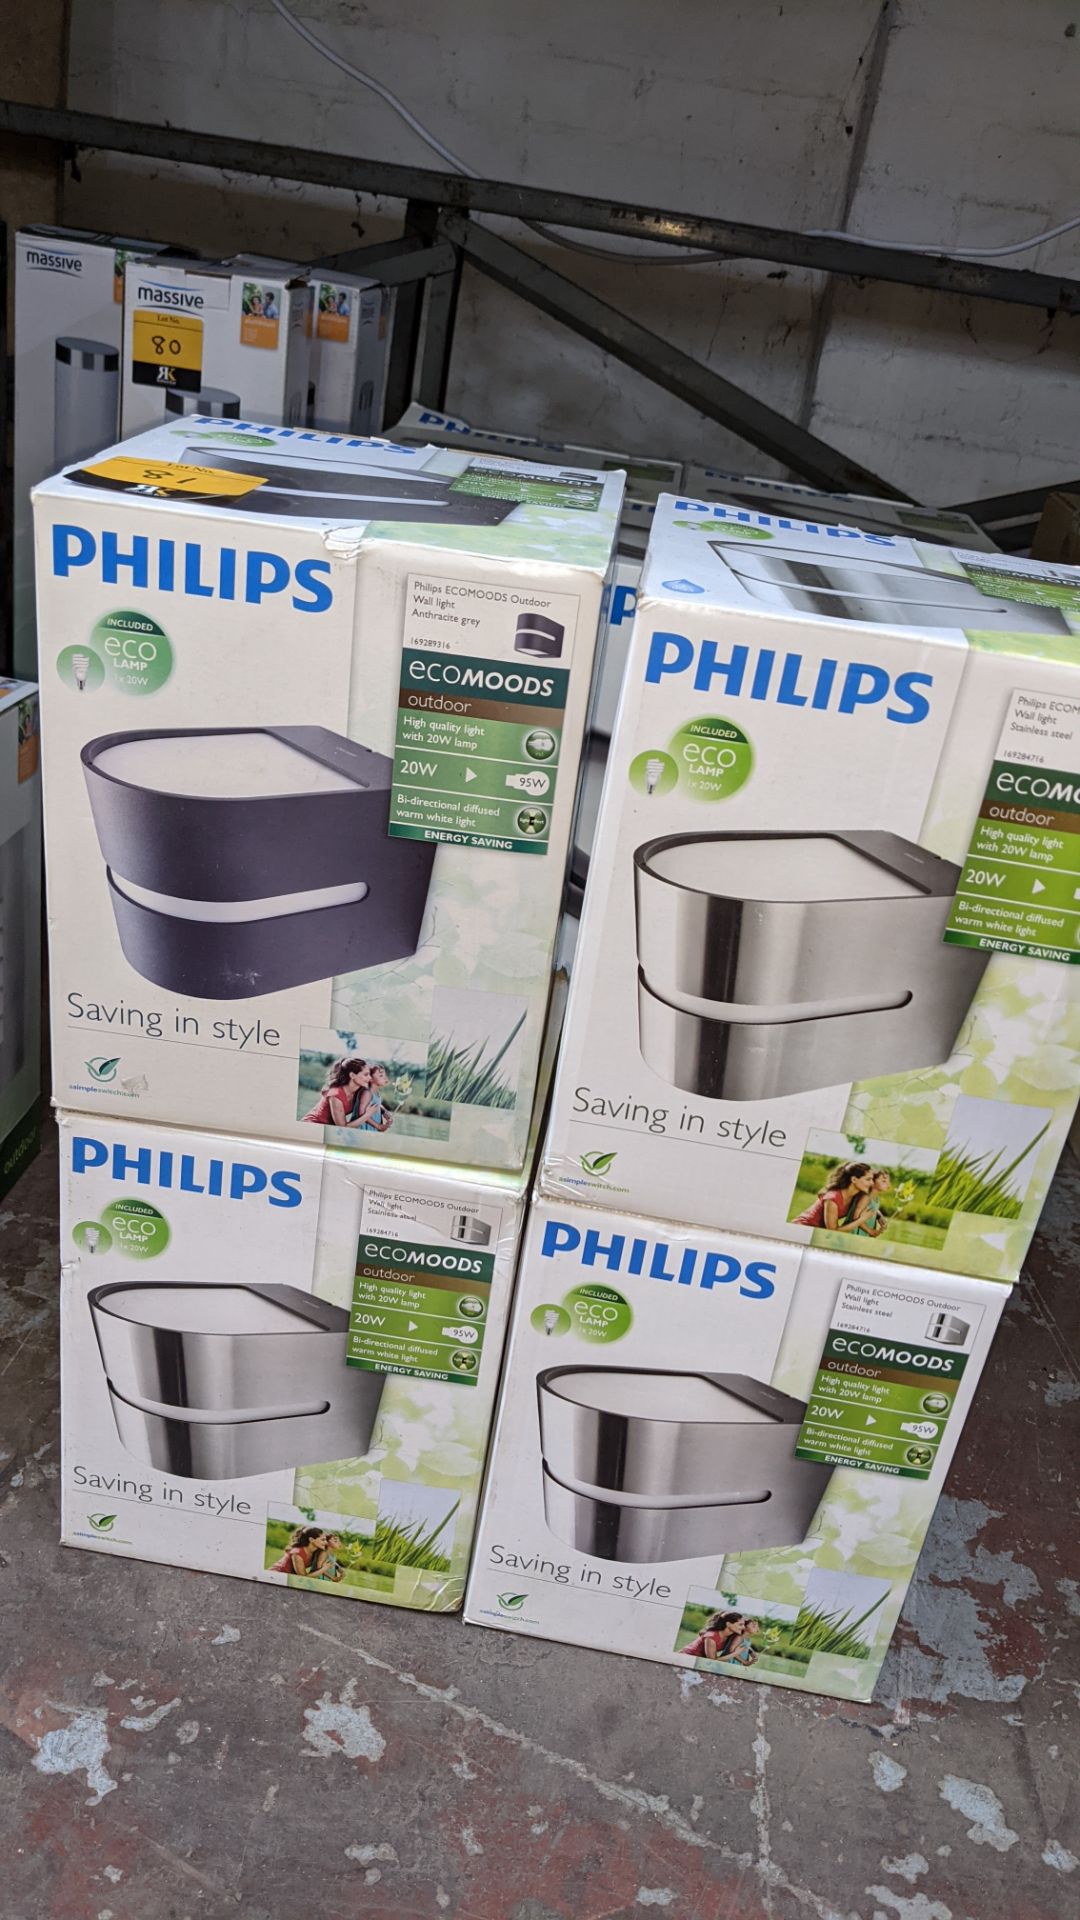 4 off Philips Ecomoods outdoor lamps in stainless steel & anthracite grey finishes - Image 3 of 3